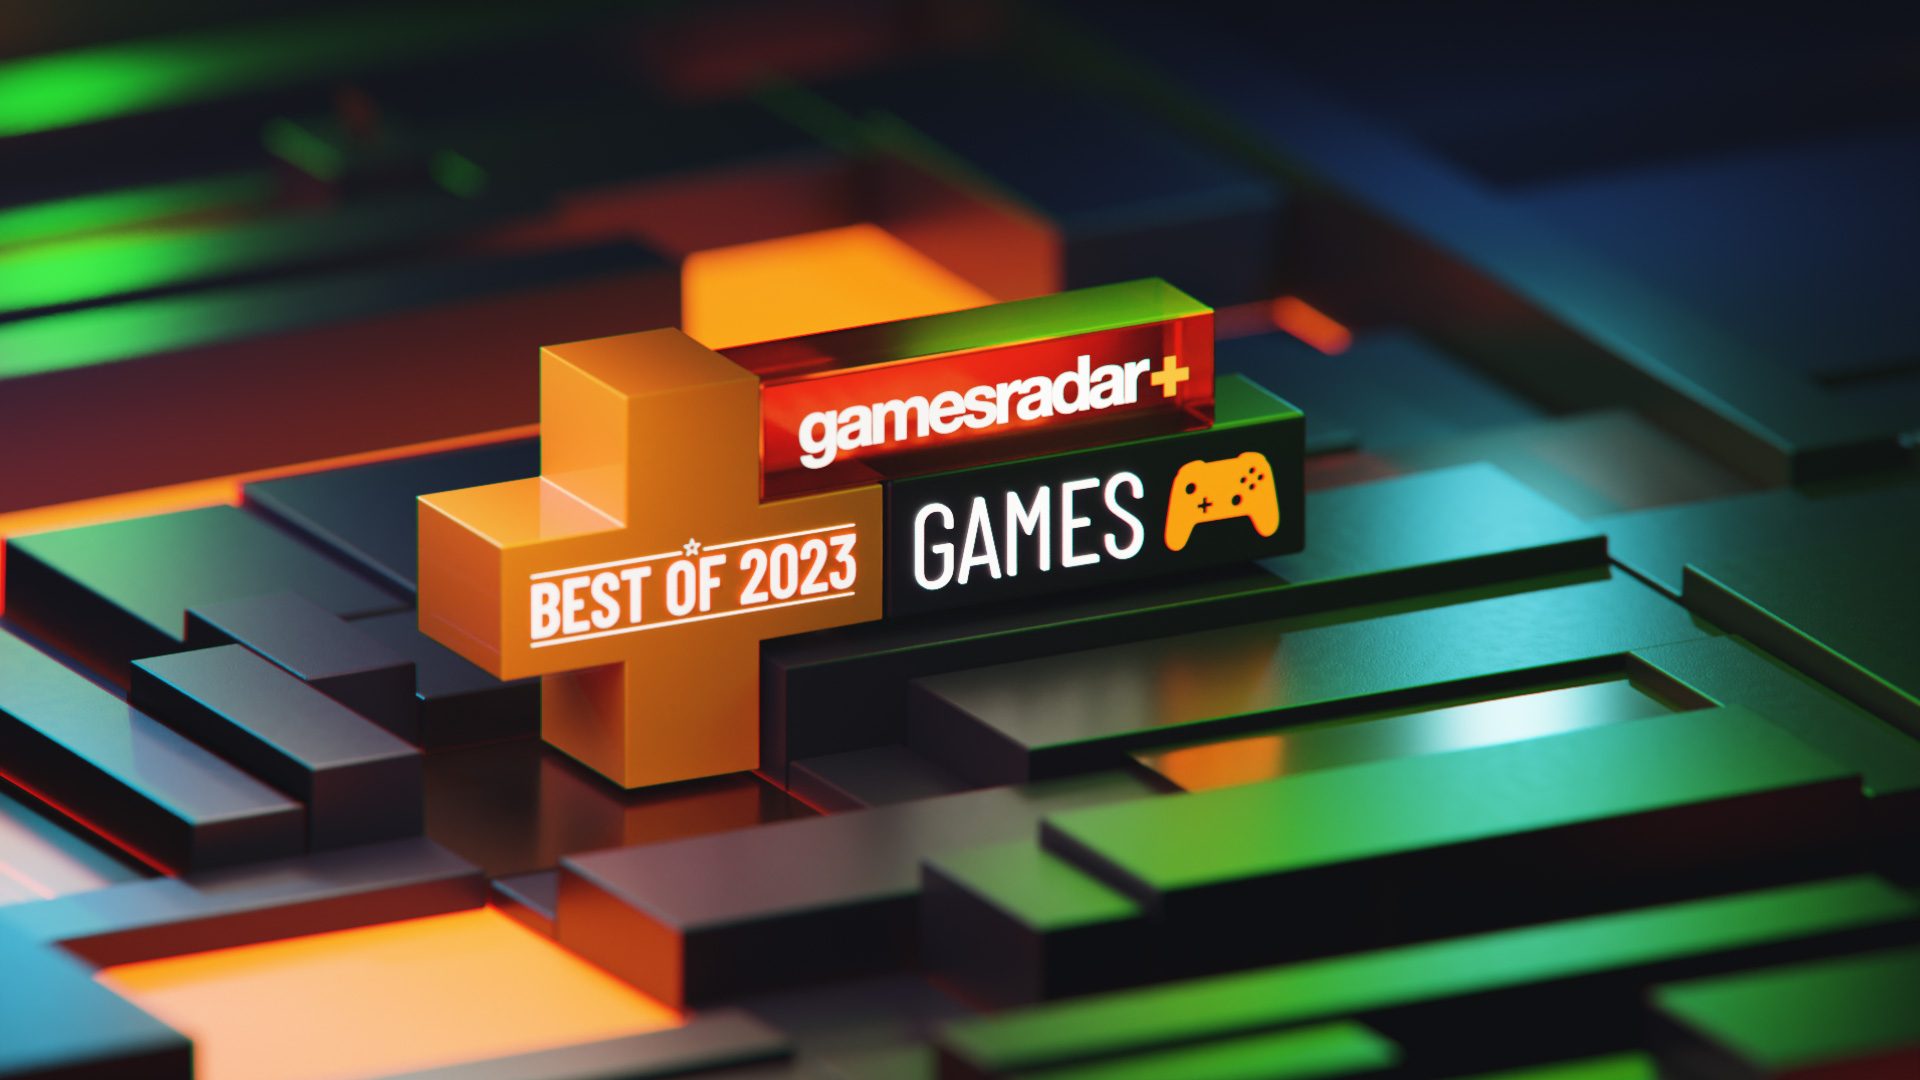 25 Best Online Co-Op Games (2023): Playstation, Xbox, PC, Switch